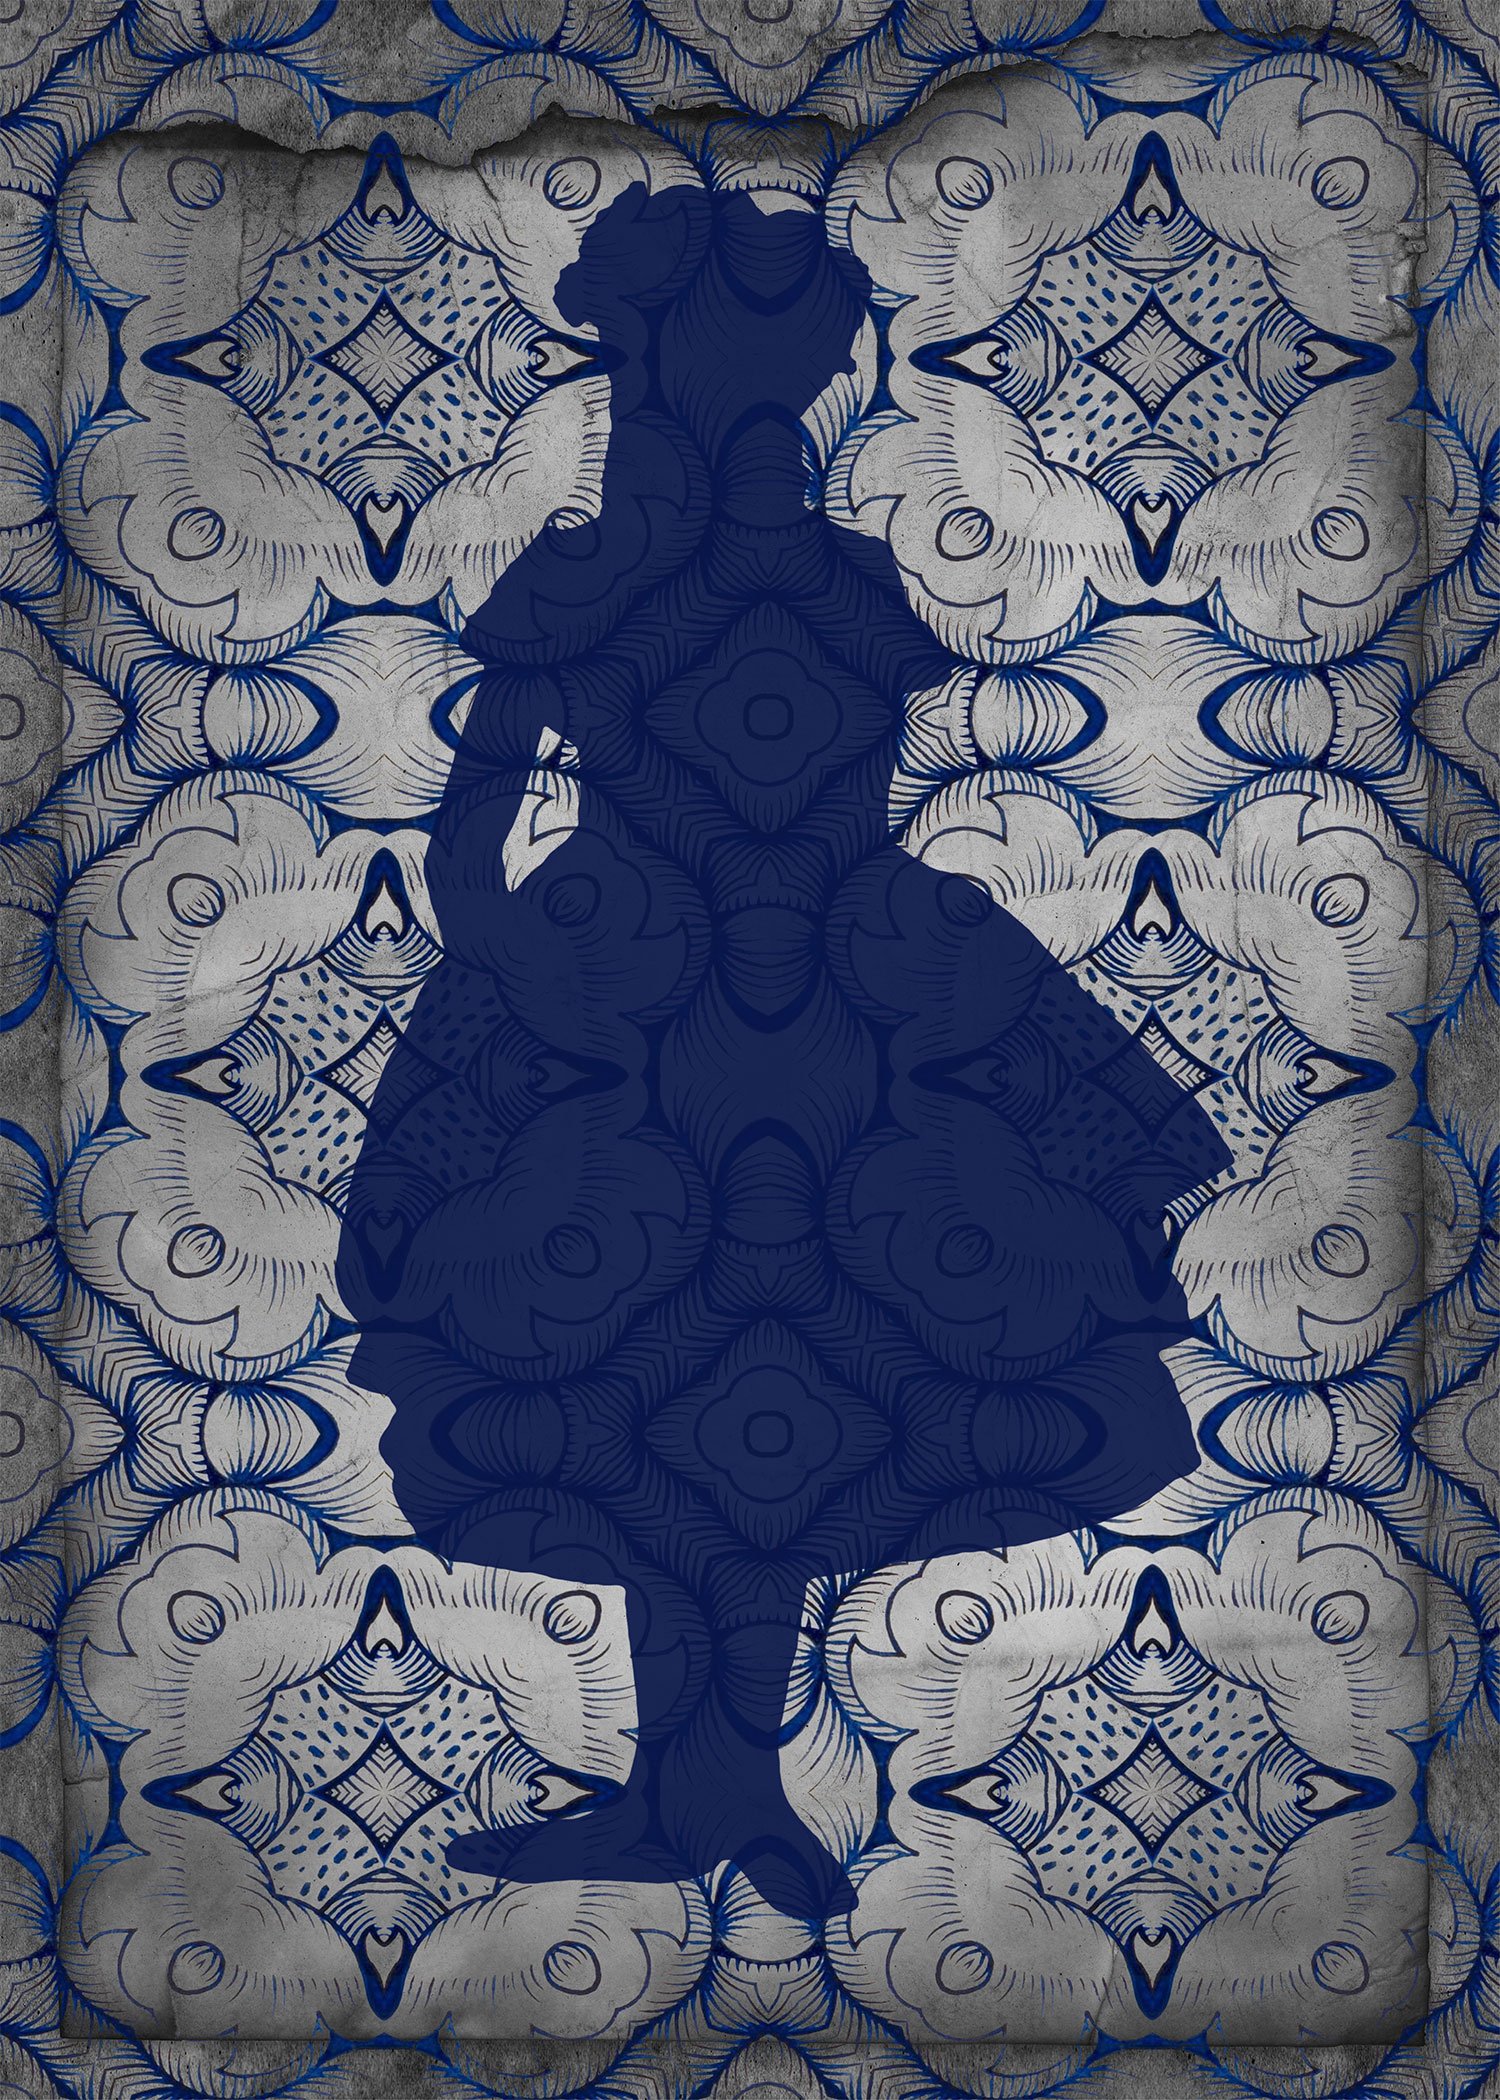 Silhouette-Lady-with-Tiles-for-WEB.jpg